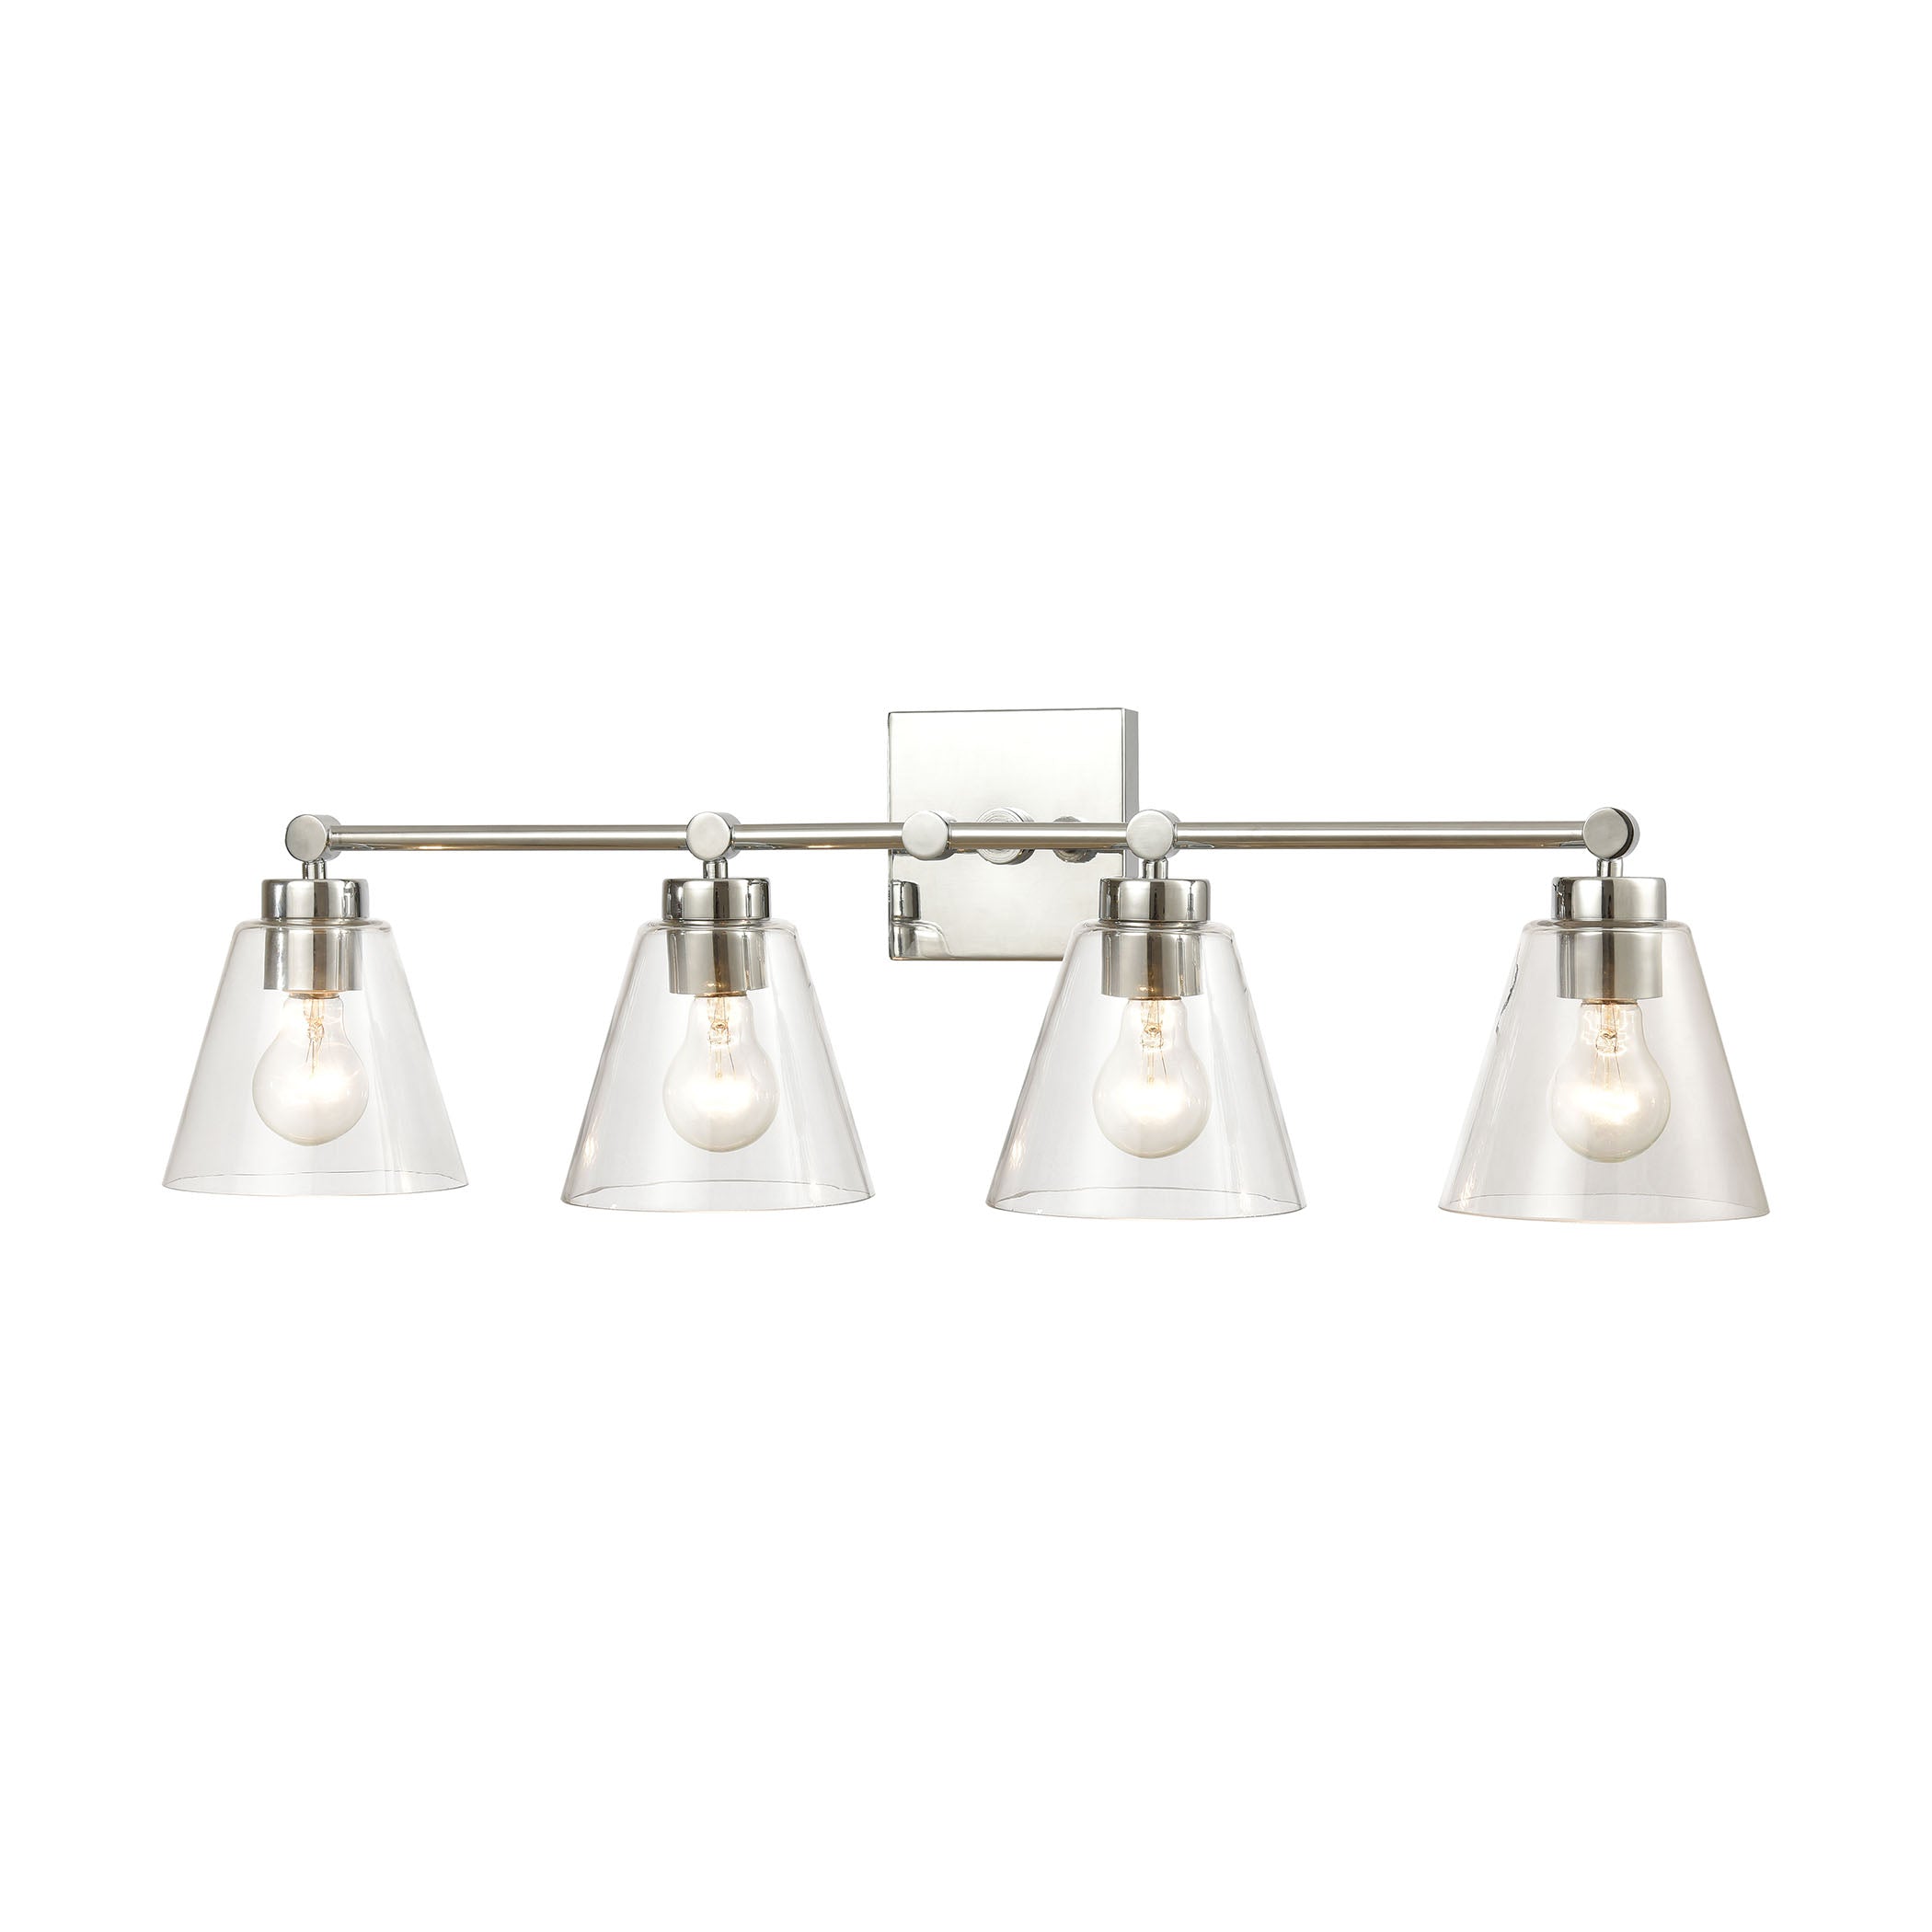 ELK Lighting 18345/4 East Point 4-Light Vanity Light in Polished Chrome with Clear Glass